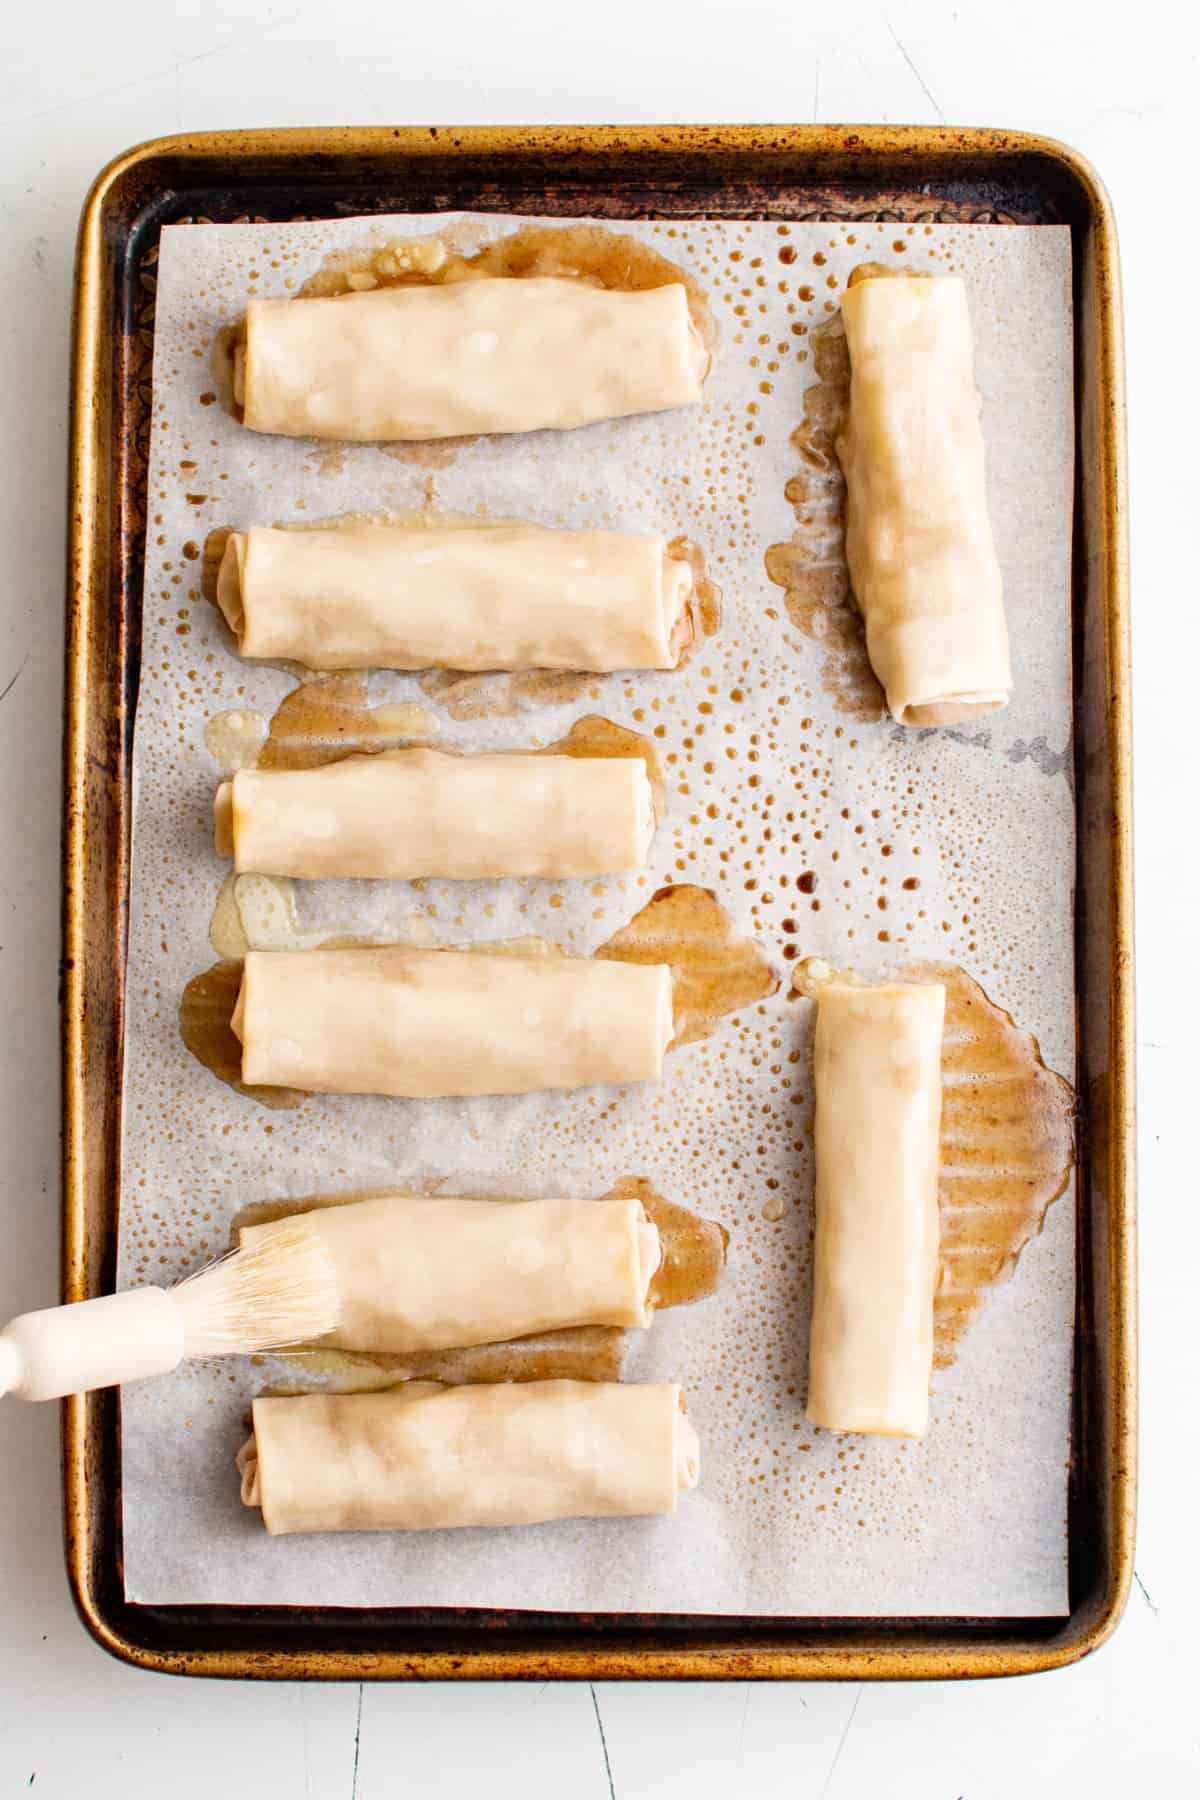 The baked egg rolls are on a sheet pan and a pastry brush is brushing them with butter before sprinkling them with cinnamon sugar.